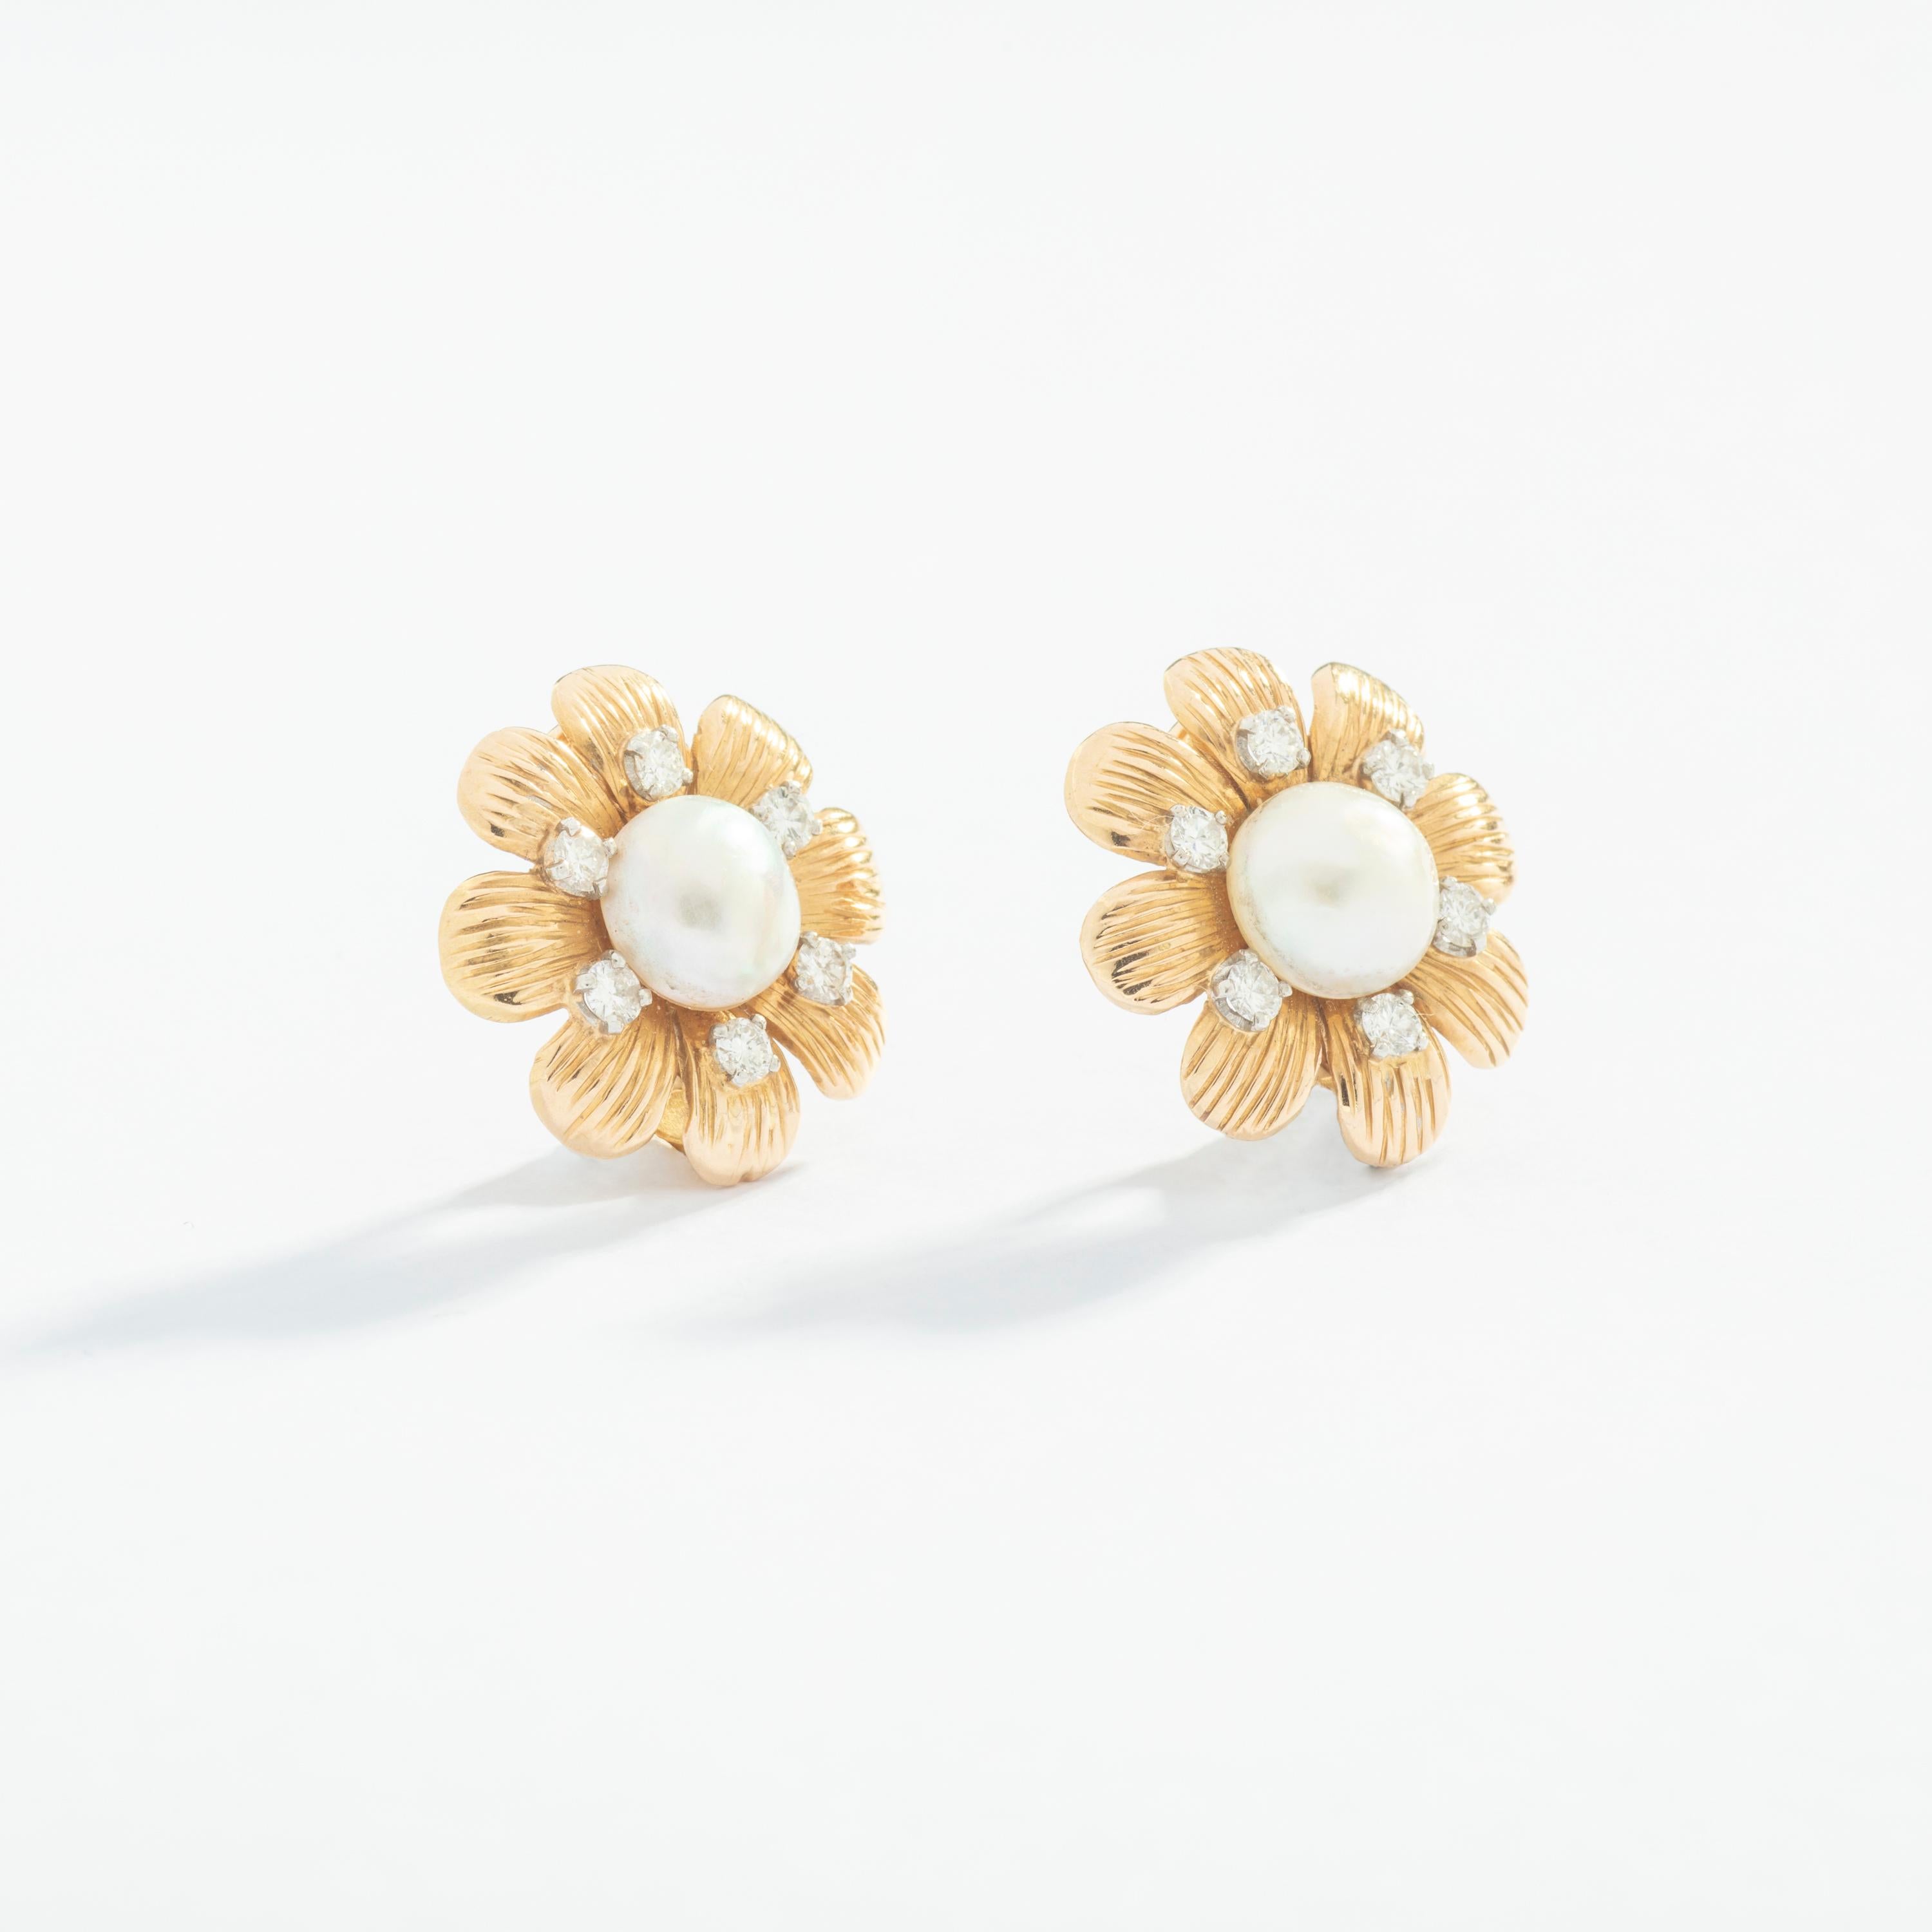 Pearl and Diamond and yellow Gold 18k Flower Ear Clips.

Total height: 0.79 inch (2.00 centimeters).
